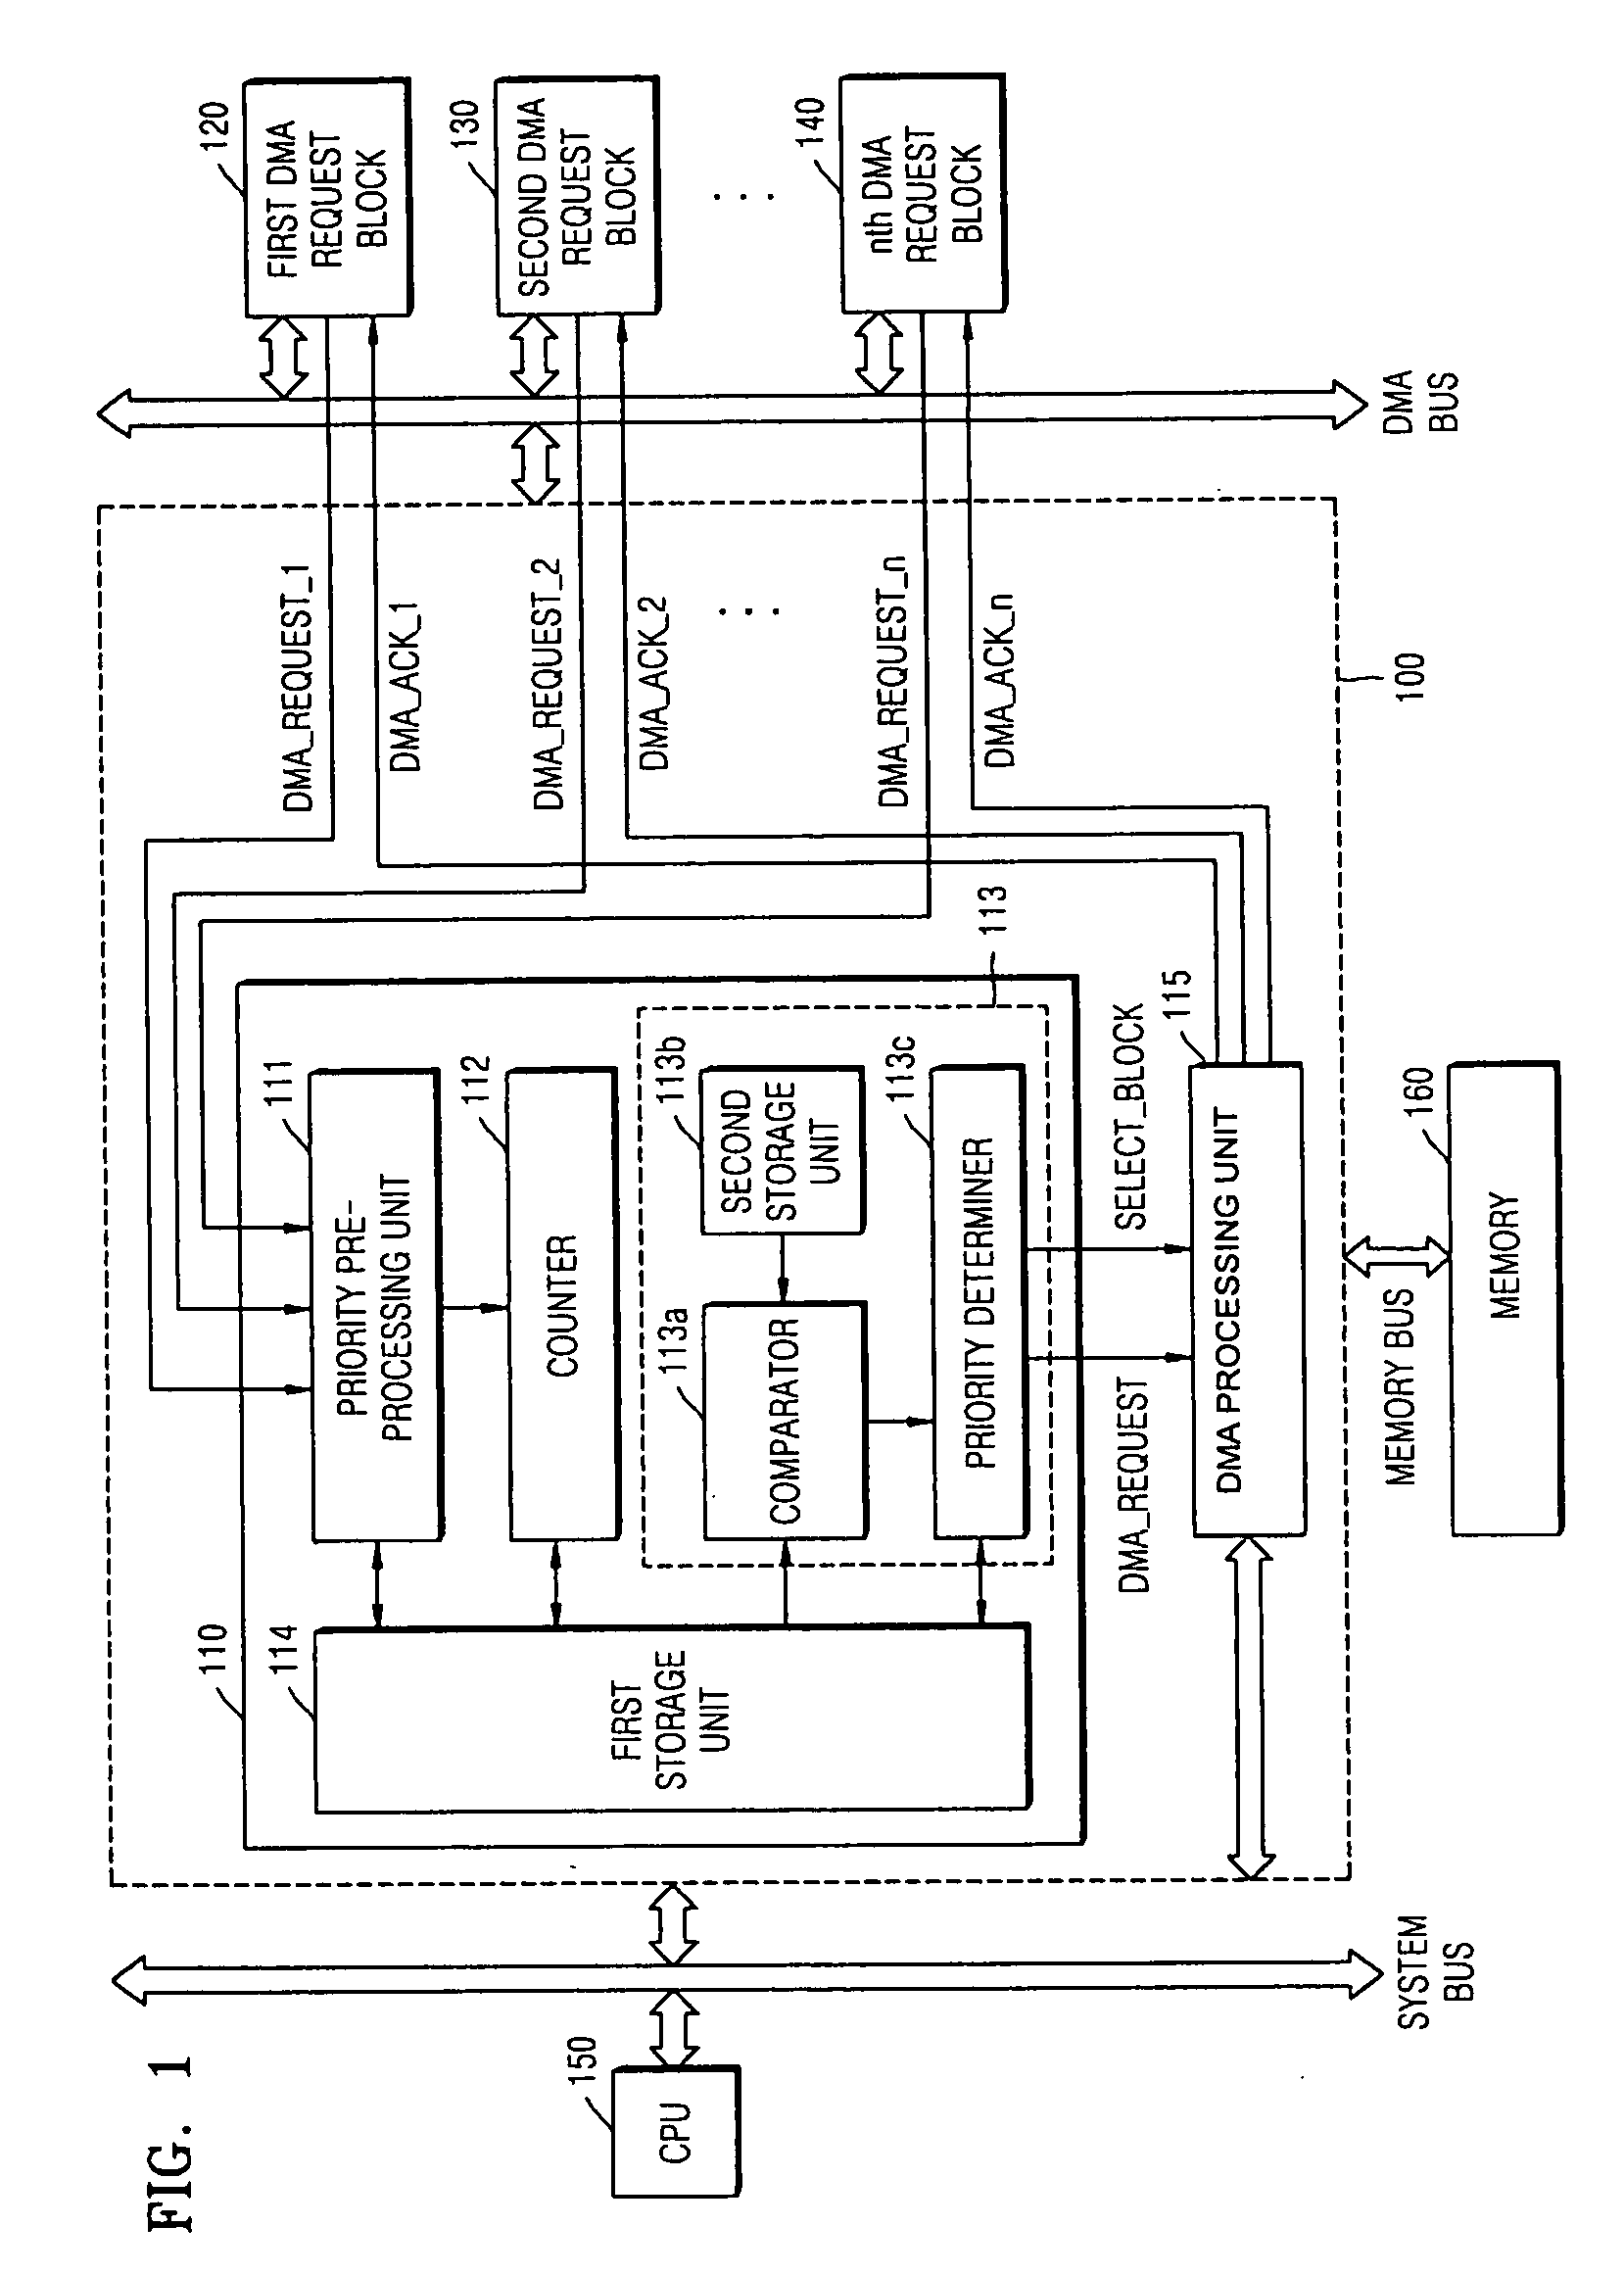 Method and apparatus for determining priorities in direct memory access device having multiple direct memory access request blocks